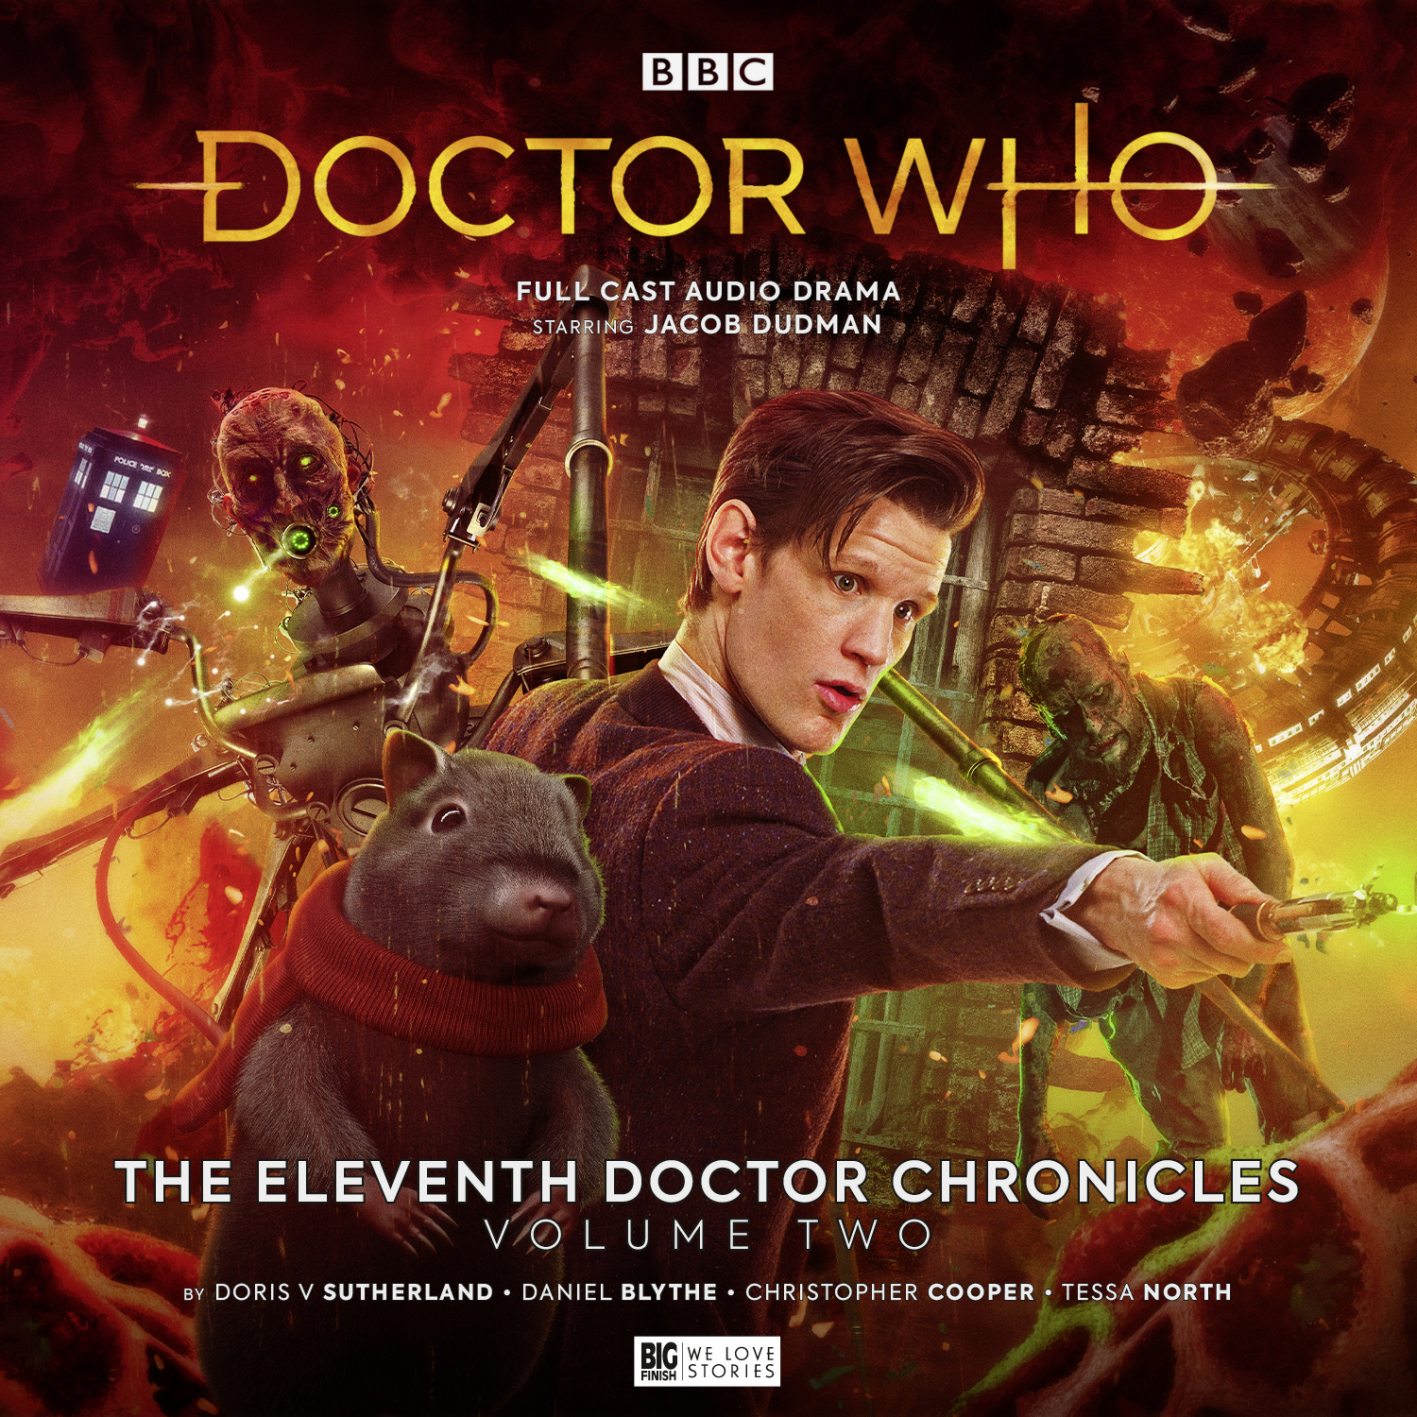 The Eleventh Doctor Chronicles: Volume Two